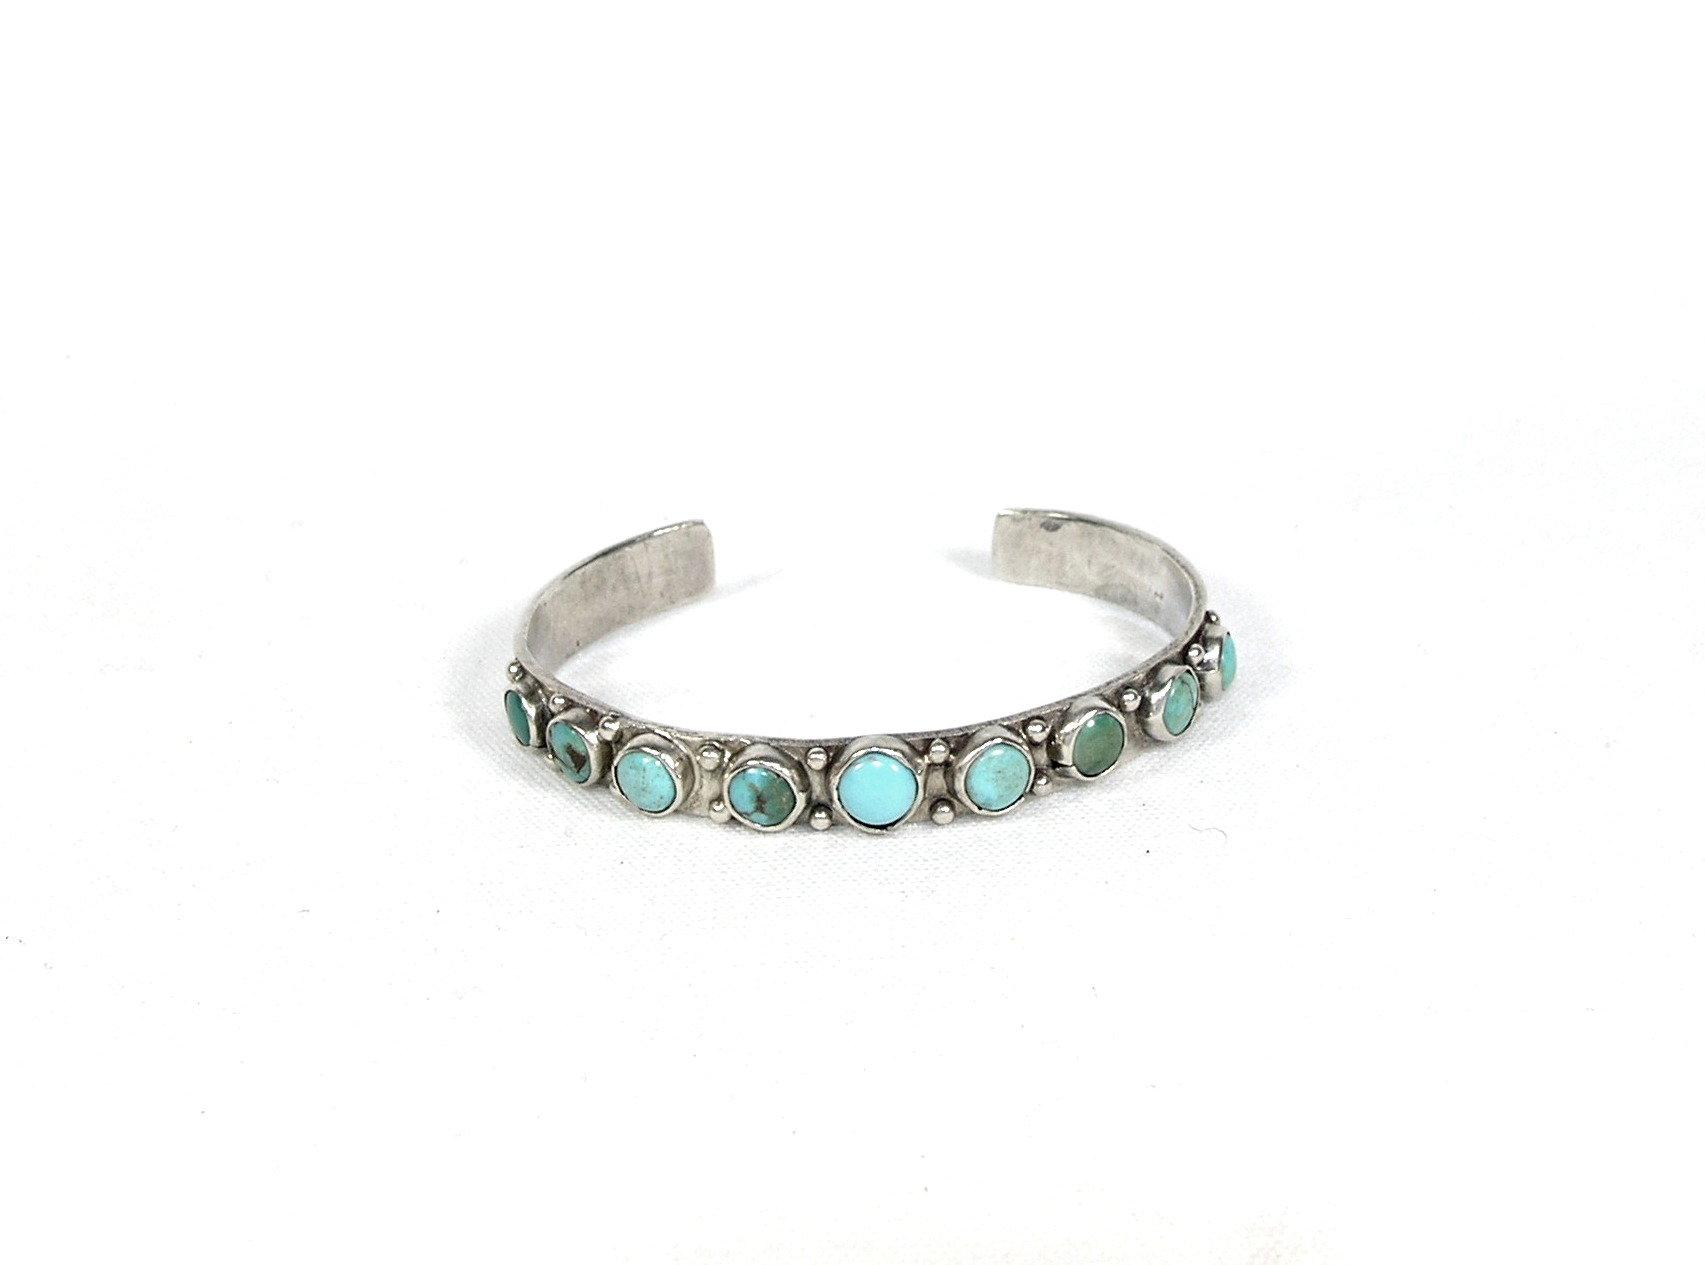 Vintage Native American Sterling Silver Wrist Bracelet With 9 Turquoise Sto